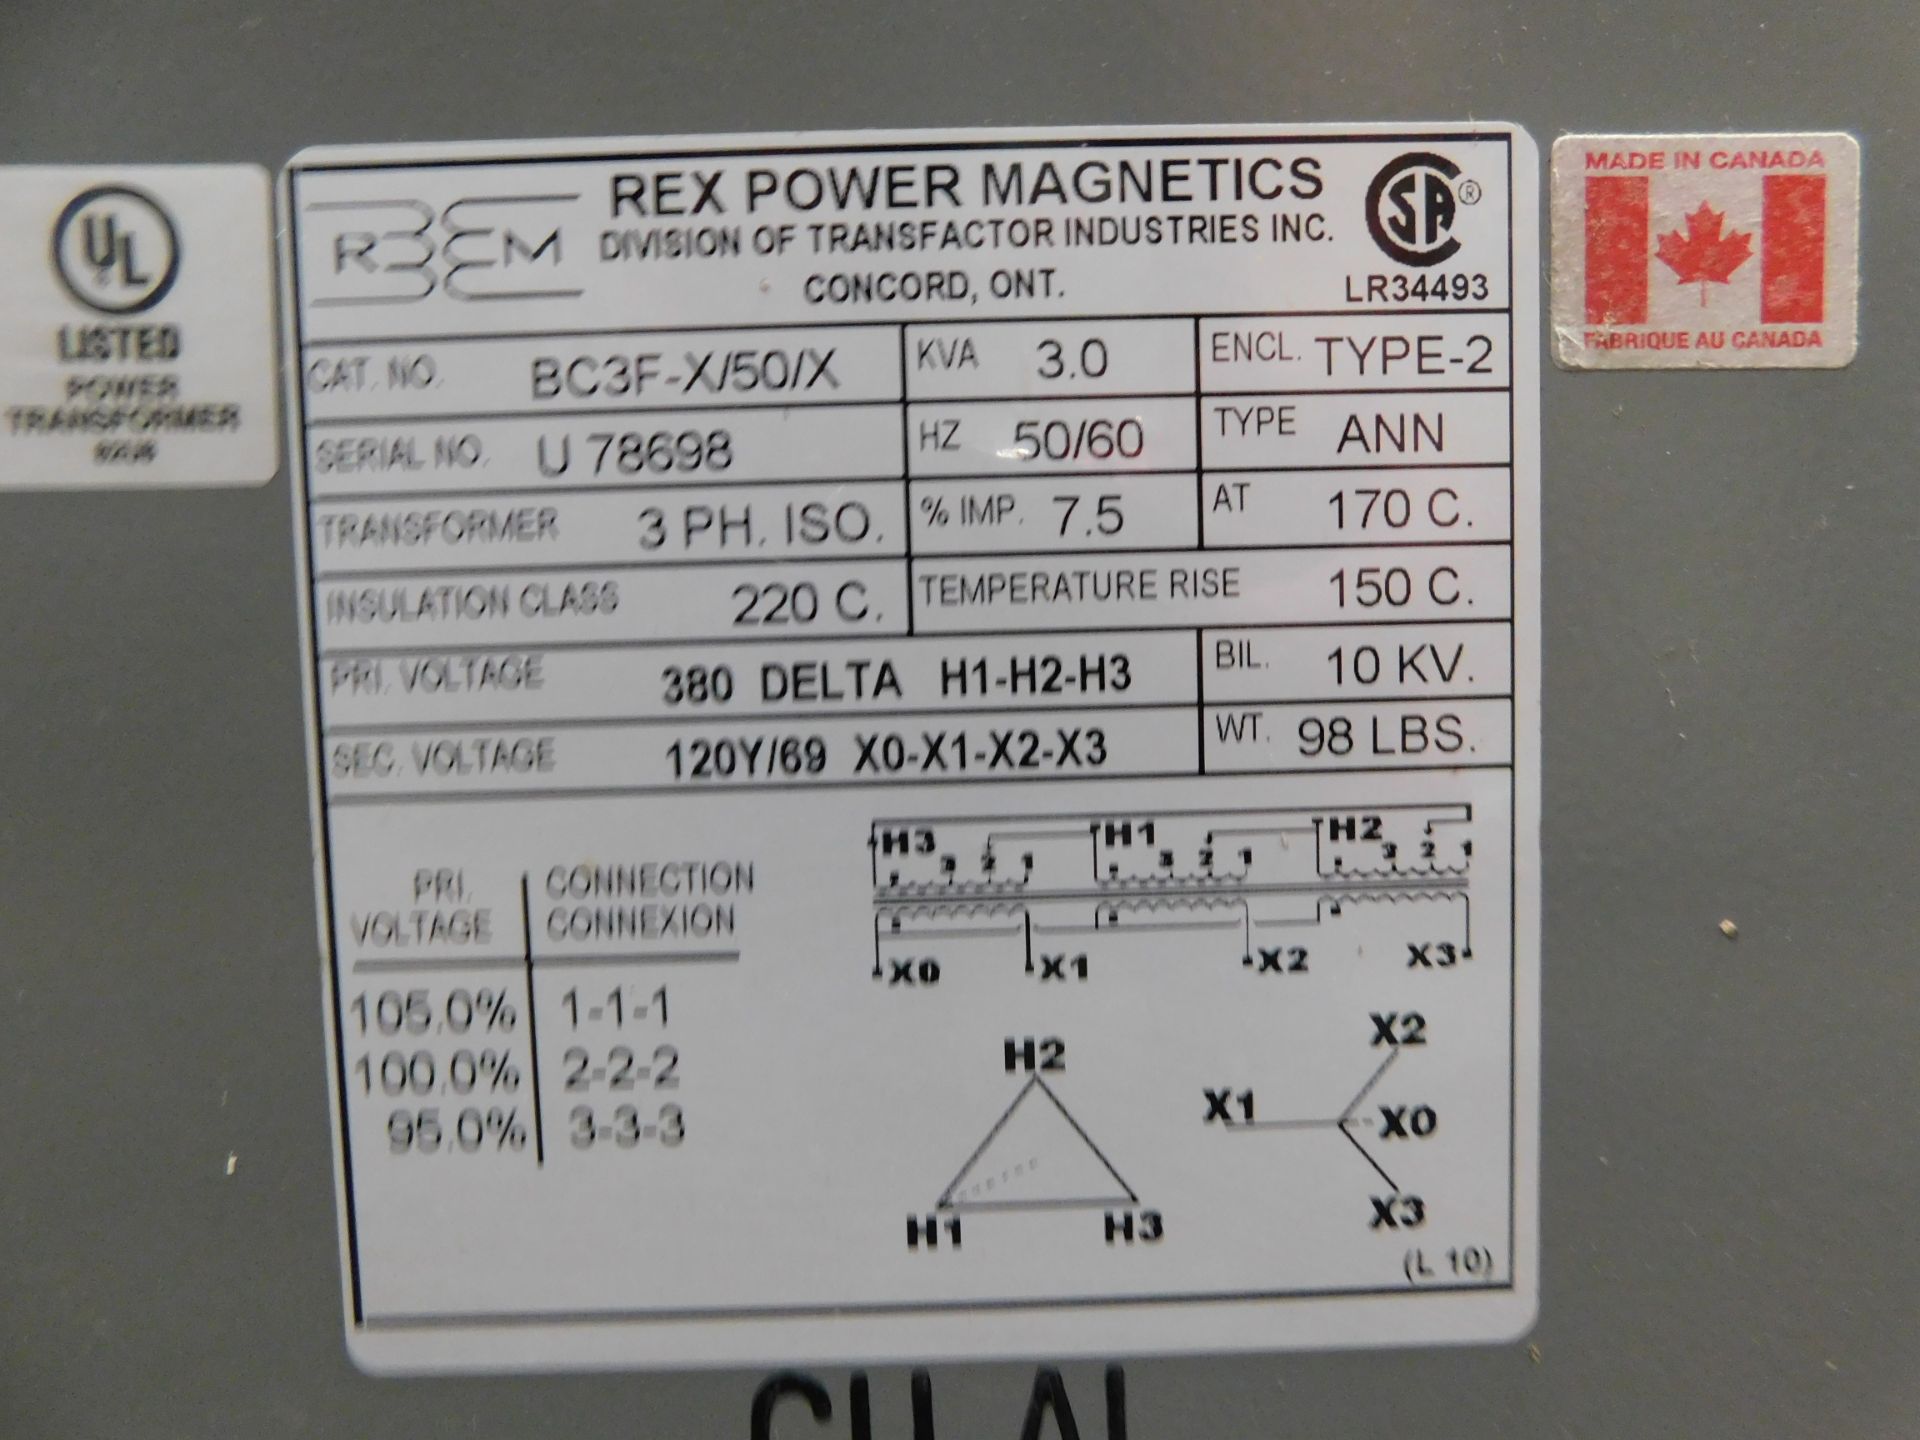 Lot of (8) Miscellaneous GE, Federal Pacific, and Rex Power Magnetics Electrical Transformers - Image 7 of 7